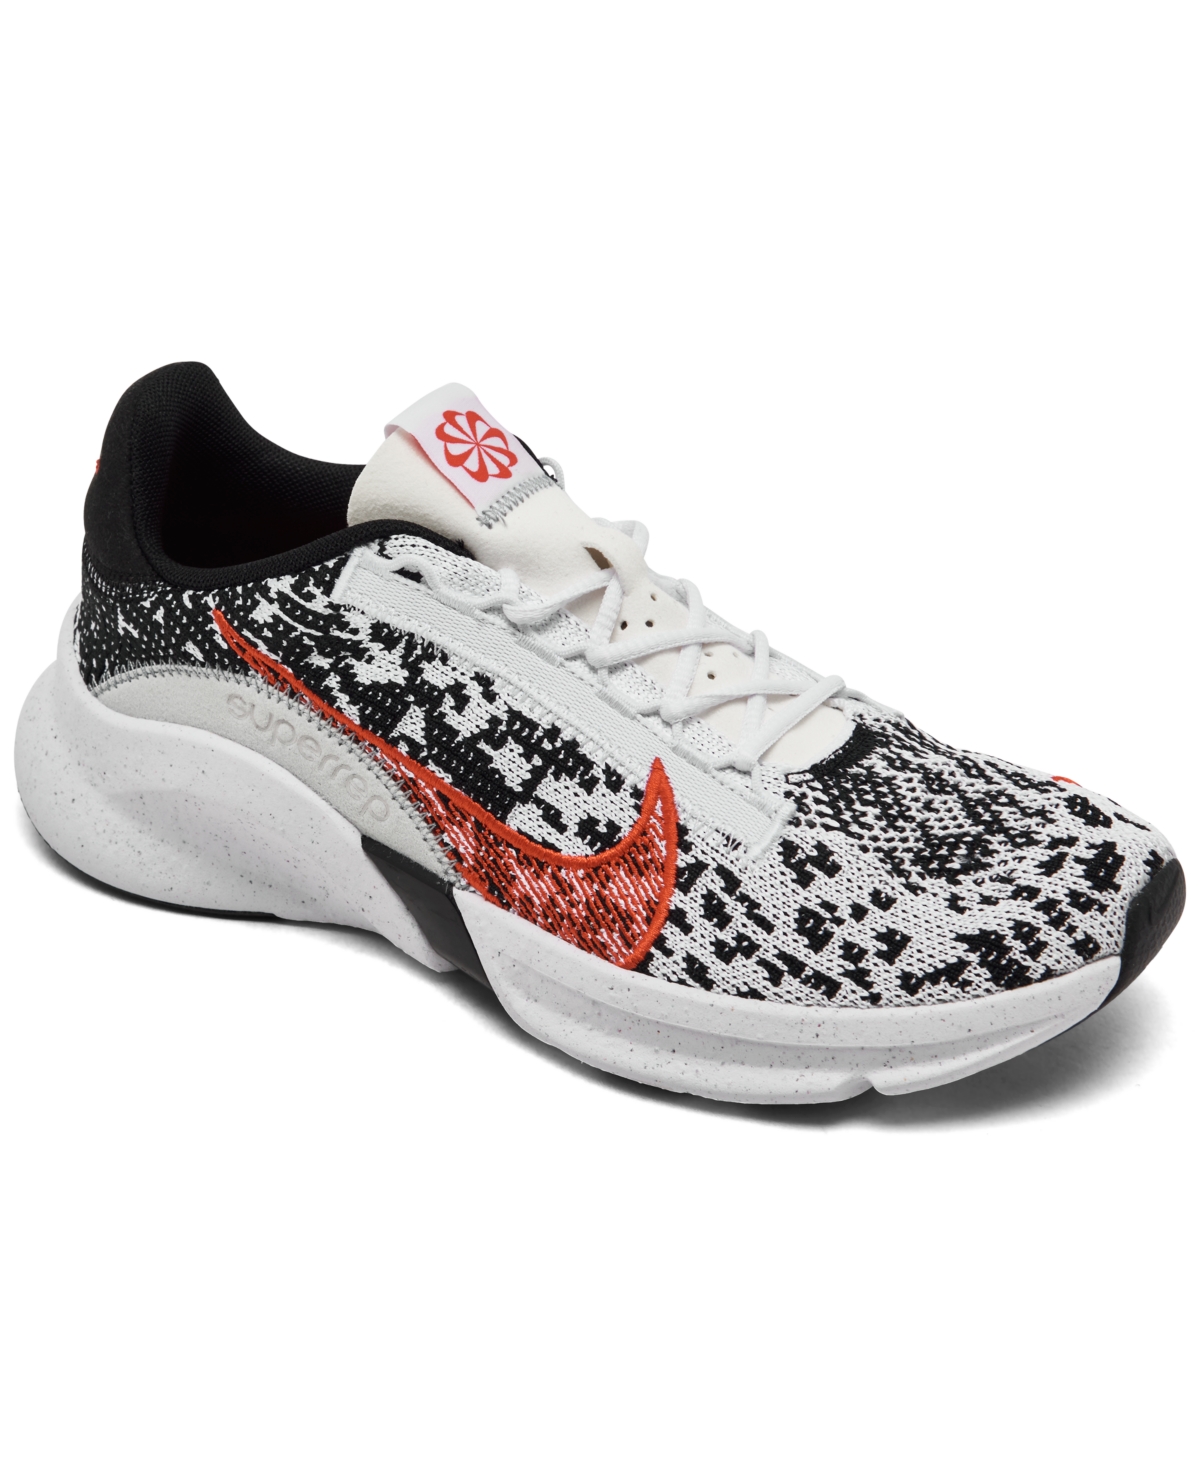 NIKE WOMEN'S SUPERREP GO 3 NEXT NATURE FLY KNIT TRAINING SNEAKERS FROM FINISH LINE